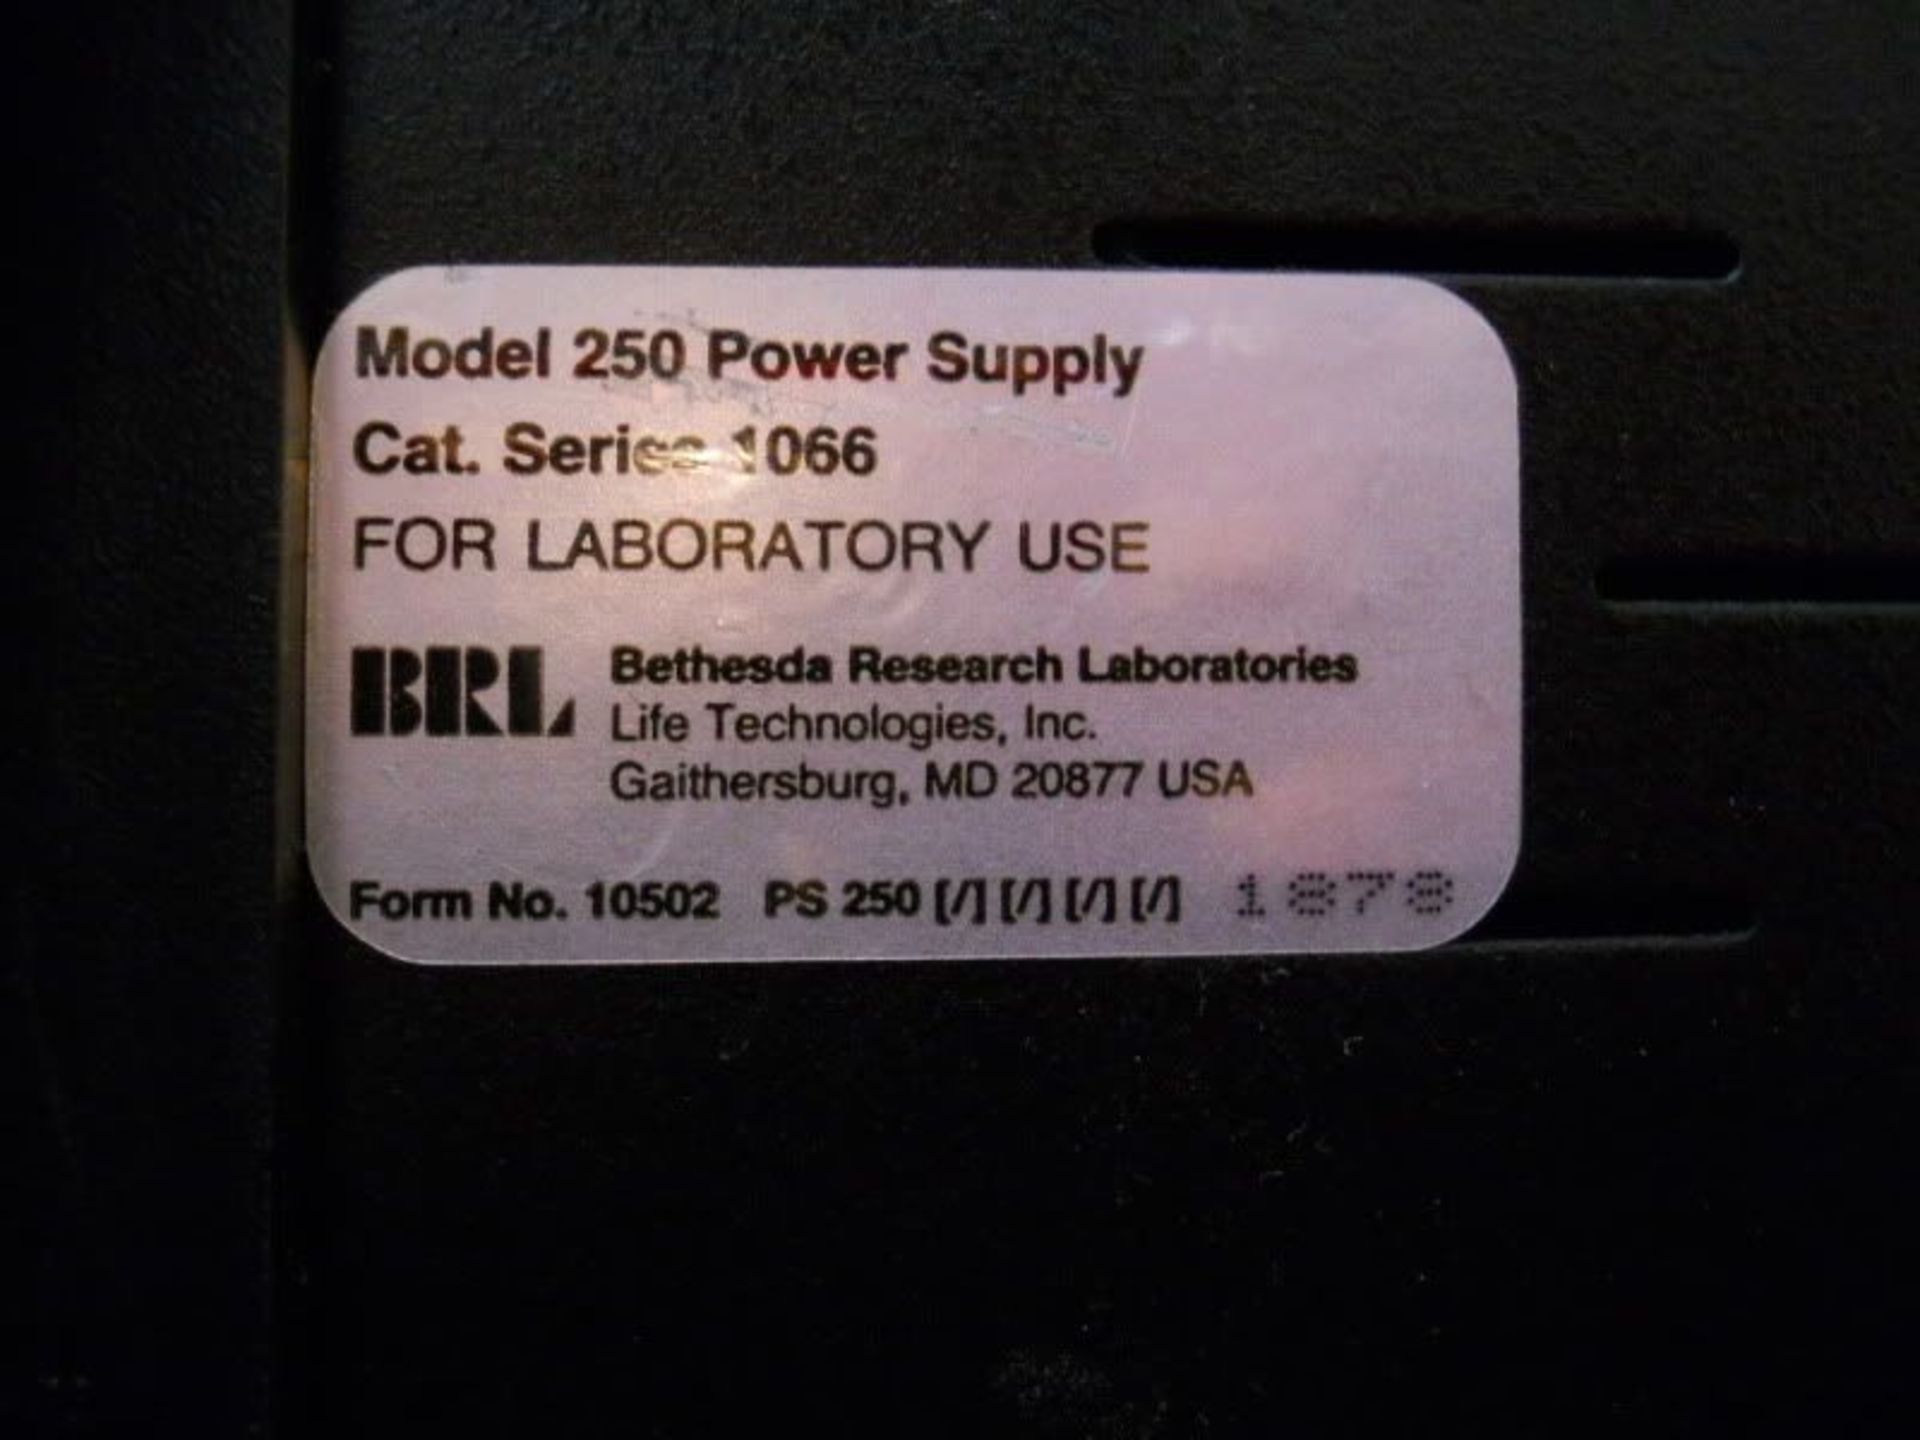 Life Technologies Inc. Power Supply Model 250 Cat. No 1066, Qty 1, 330759579567 - Image 6 of 8